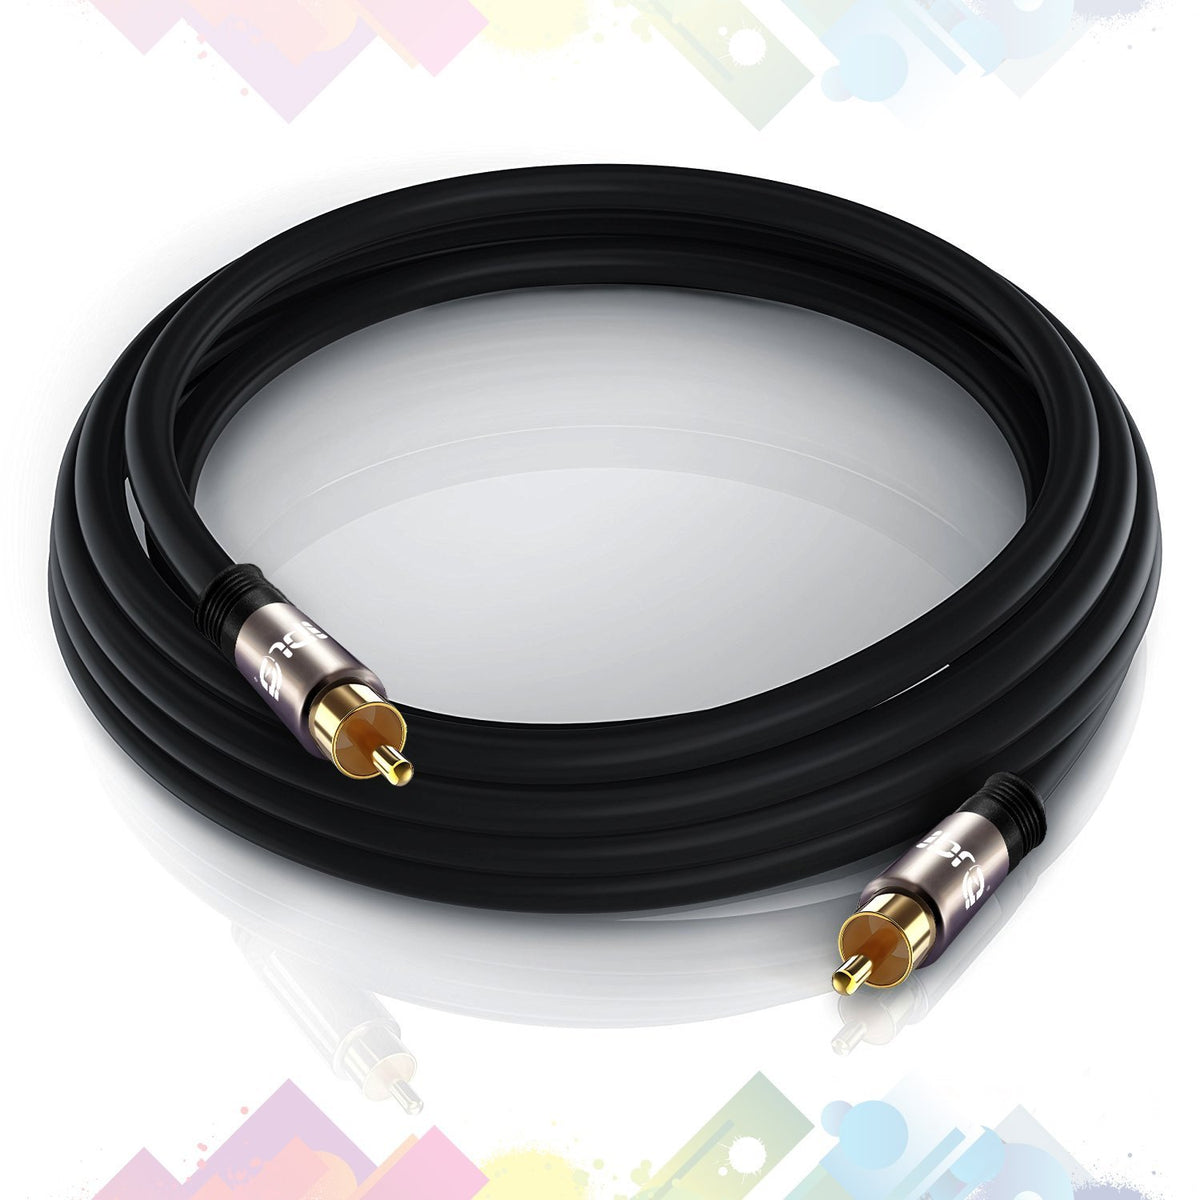 IBRA 0.5M Digital Coaxial Cable / Subwoofer Cable / Audio Cable / RCA Cable (1 x RCA to 1 x RCA) - Gun Metal range